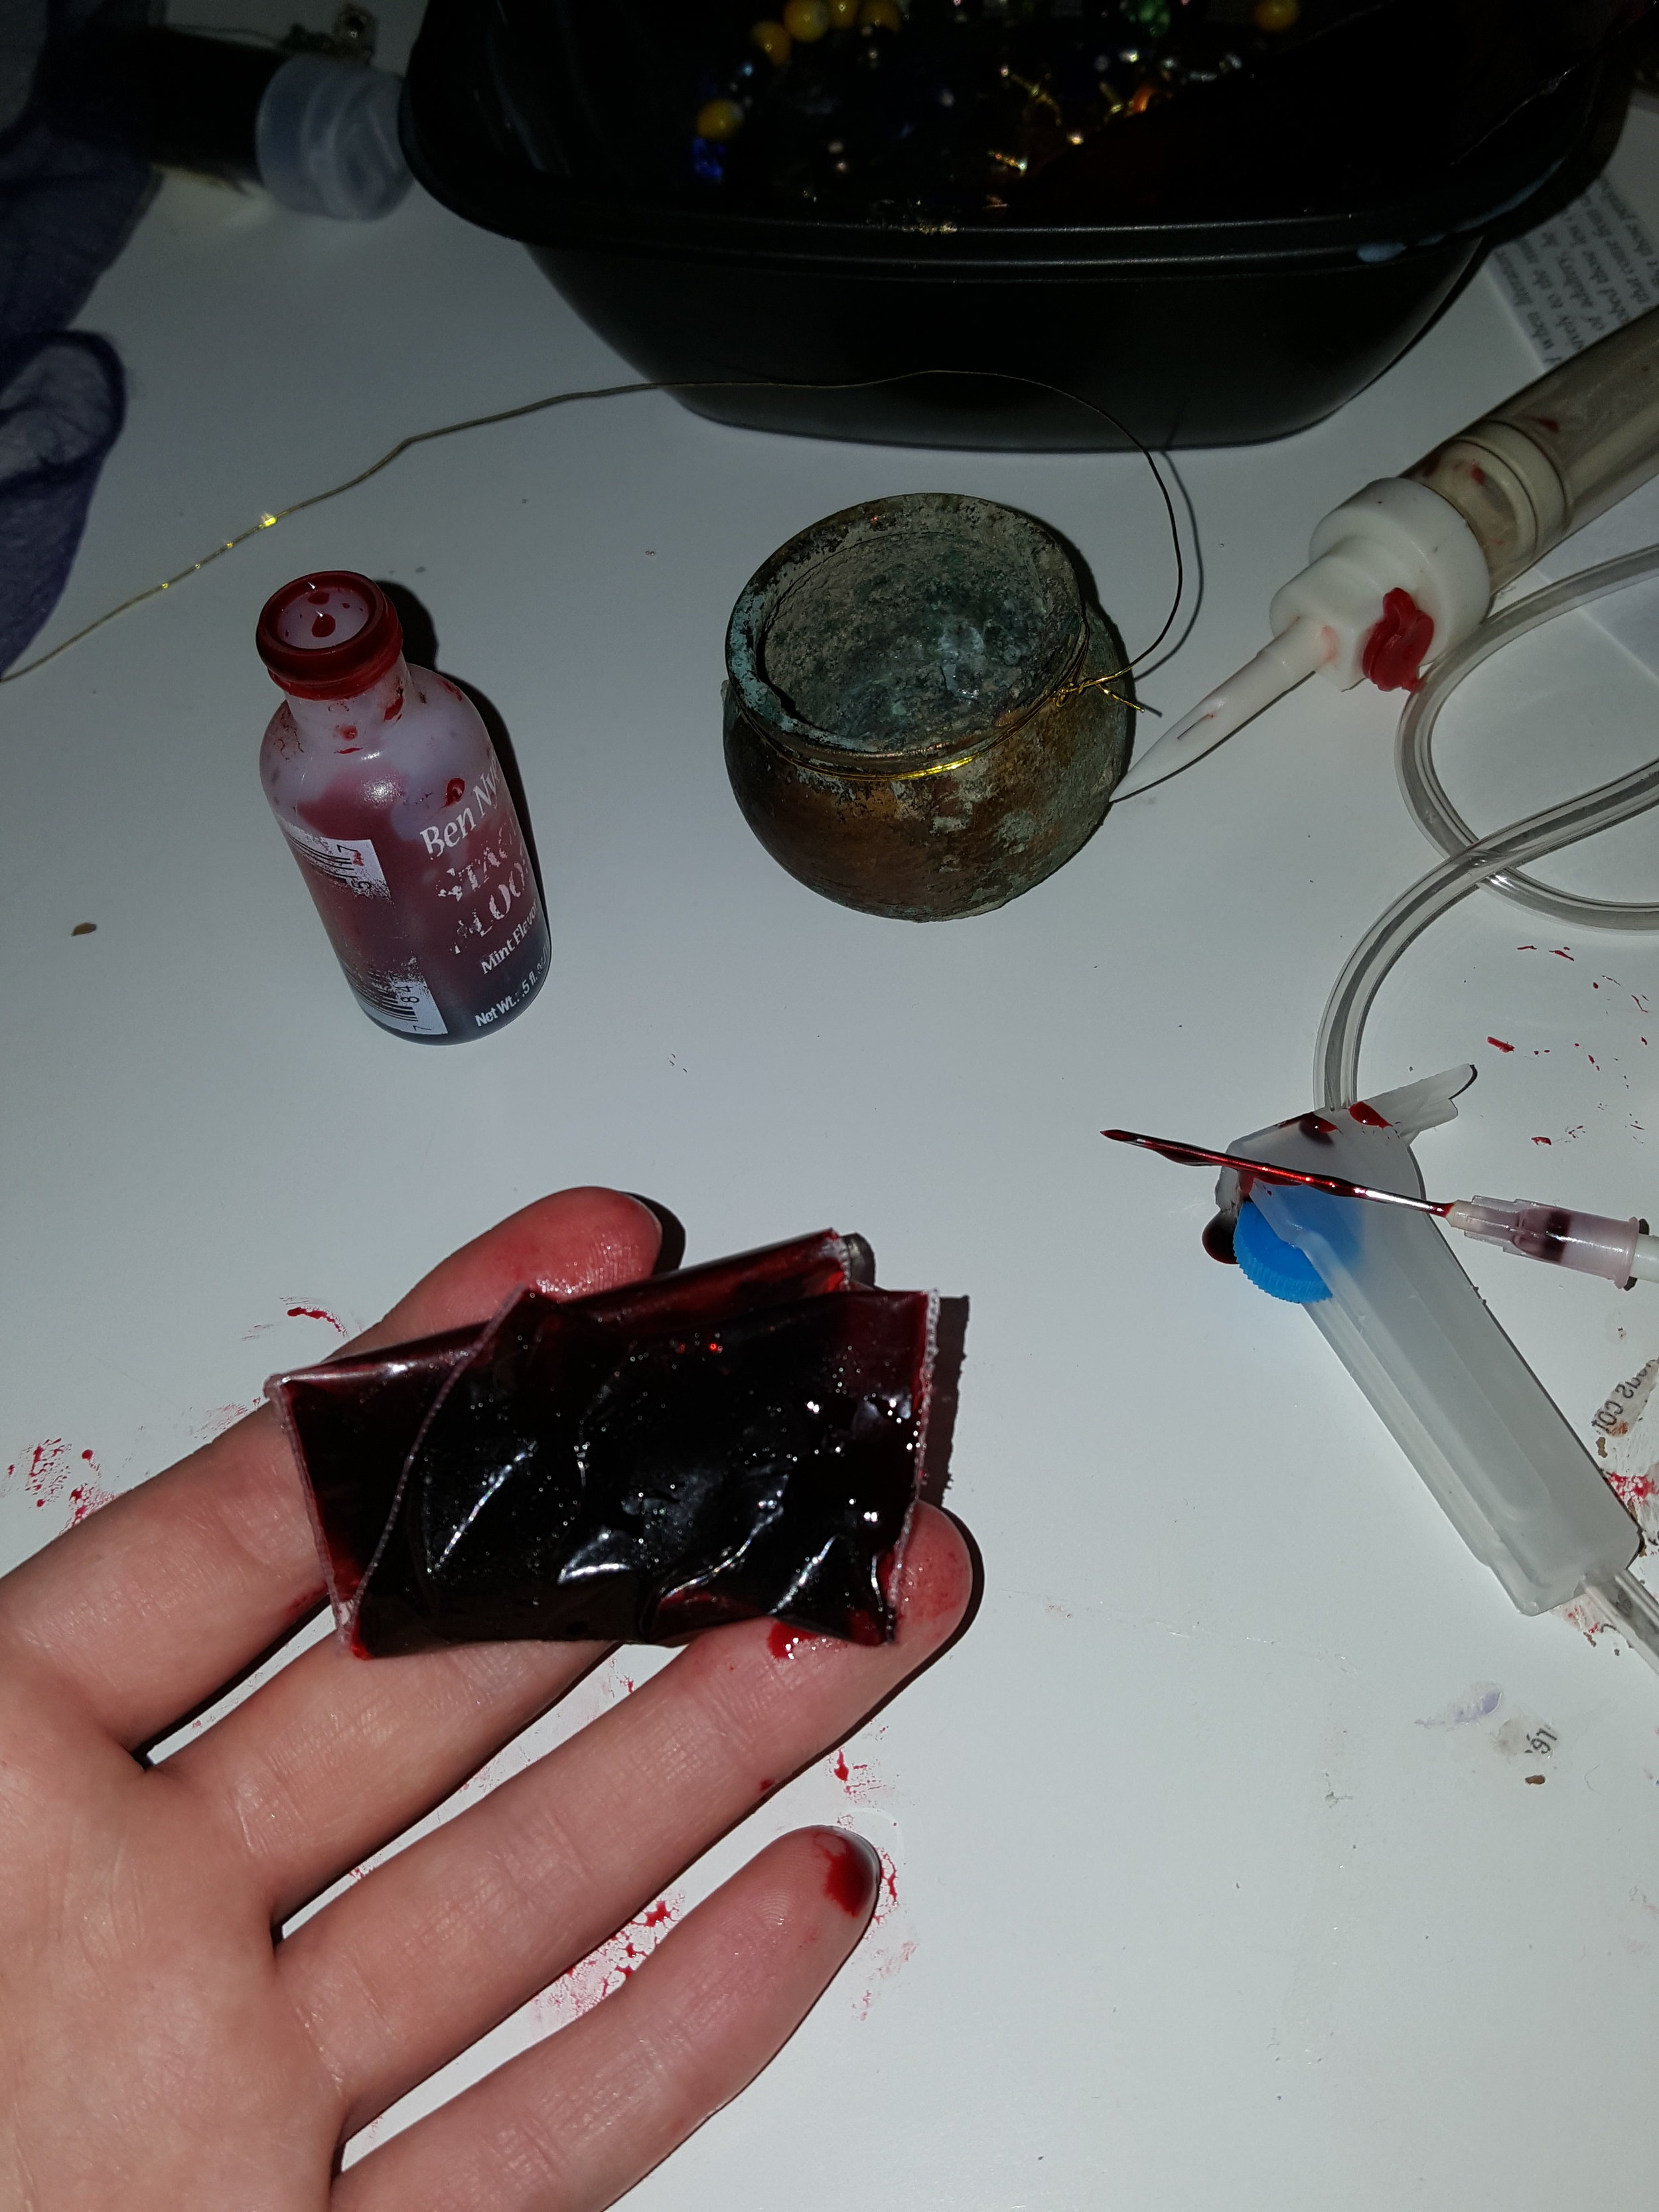  One of the stranger days I’ve spent in my apartment, trying to find household objects that could mimic a beating heart to pump  fake  blood into a  real  transfusion needle. I did not succeed, since this is medical equipment designed to keep blood s